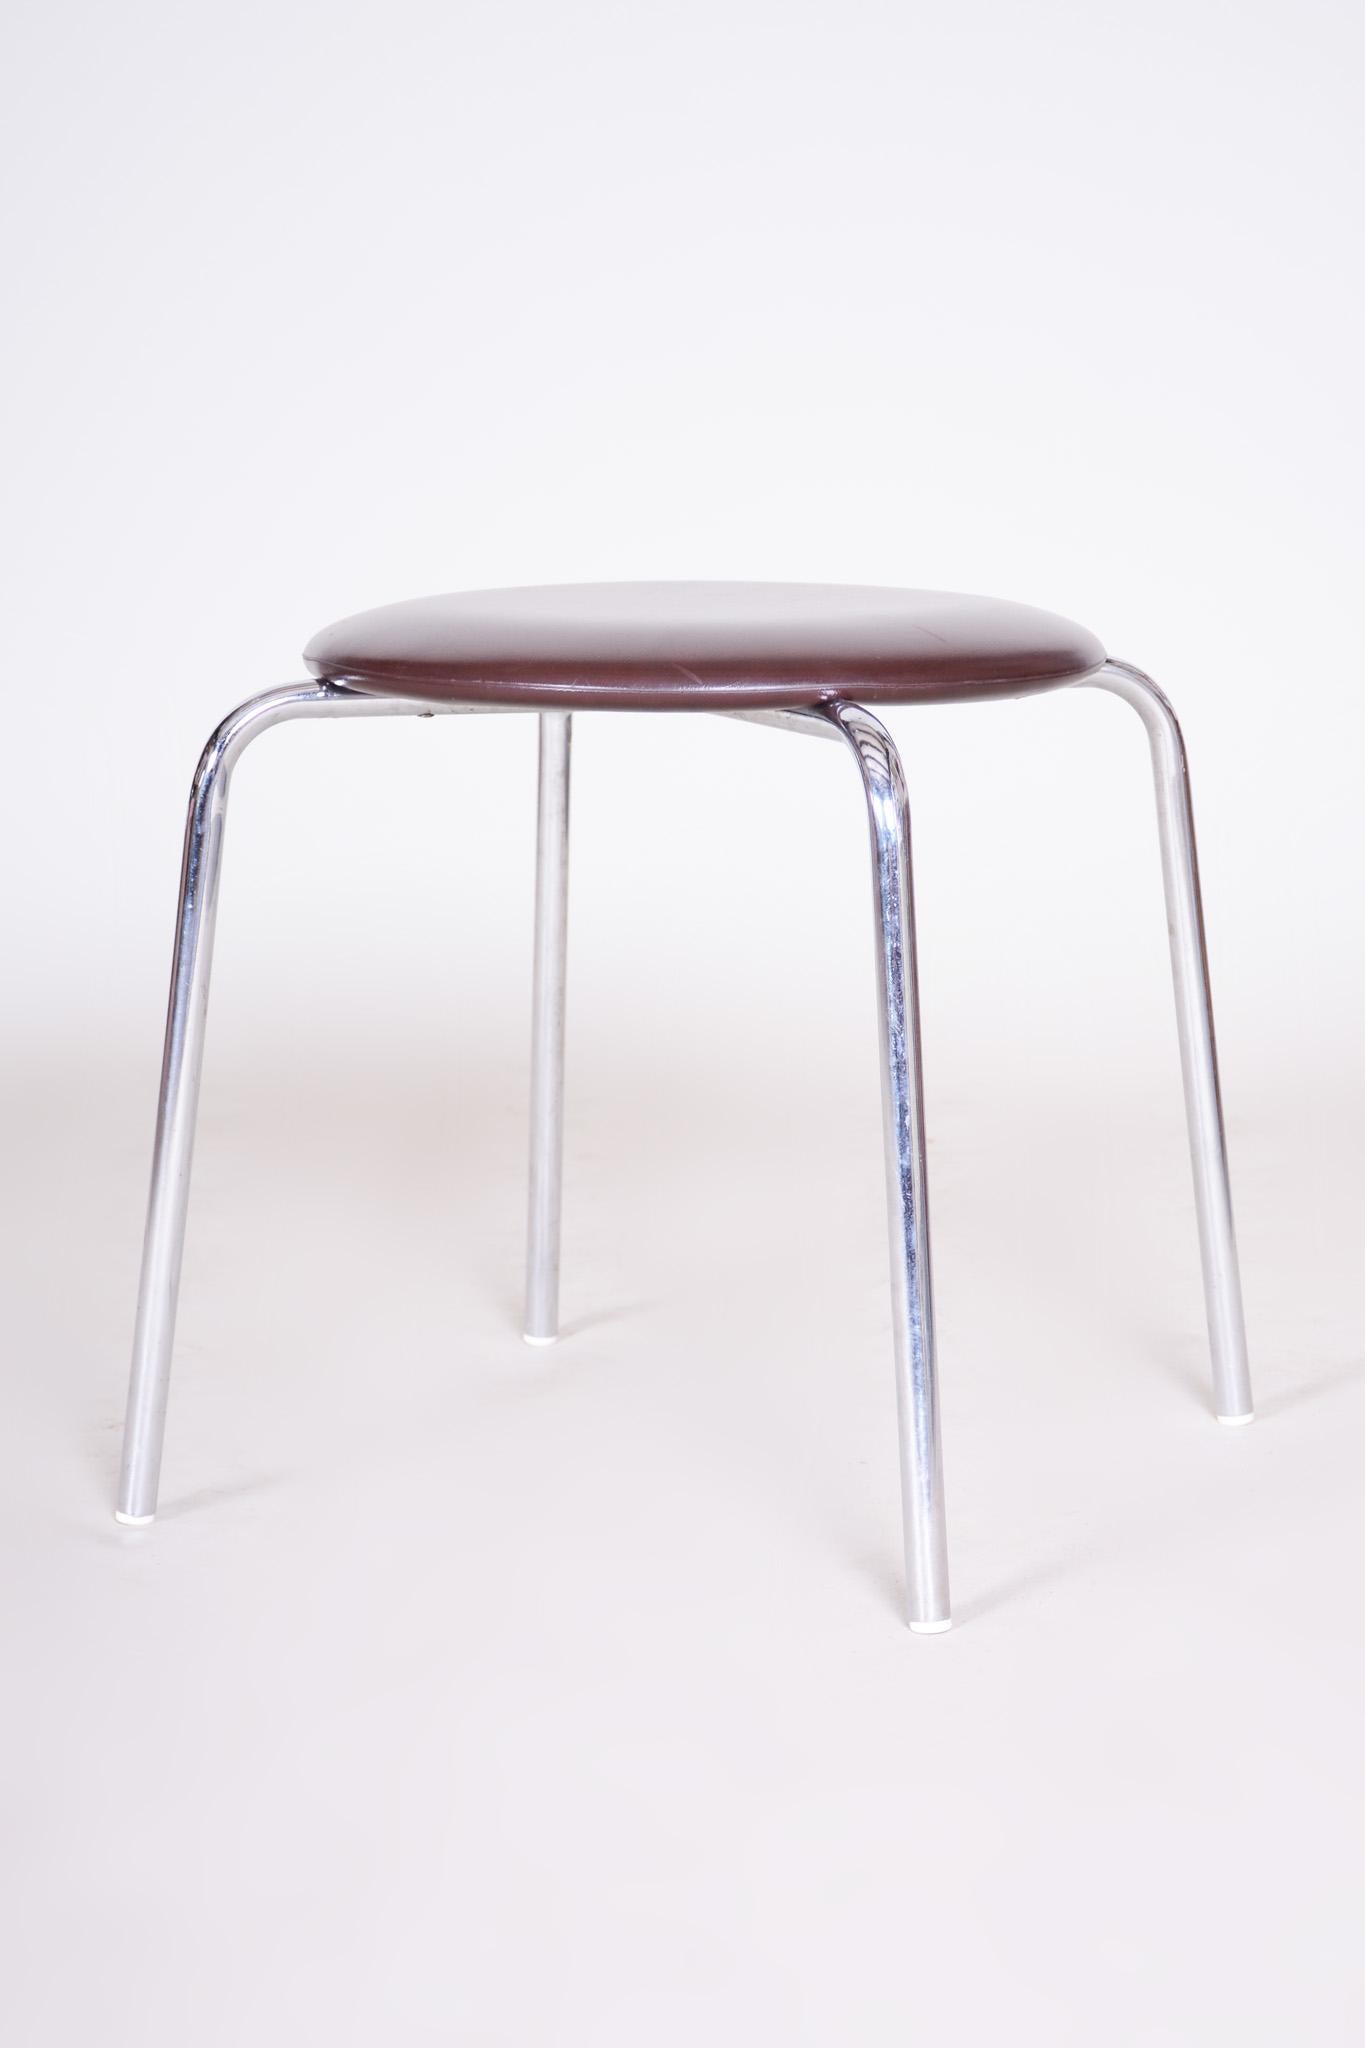 20th Century Midcentury Steel and Leatherette Stools, 1960s, Original Condition For Sale